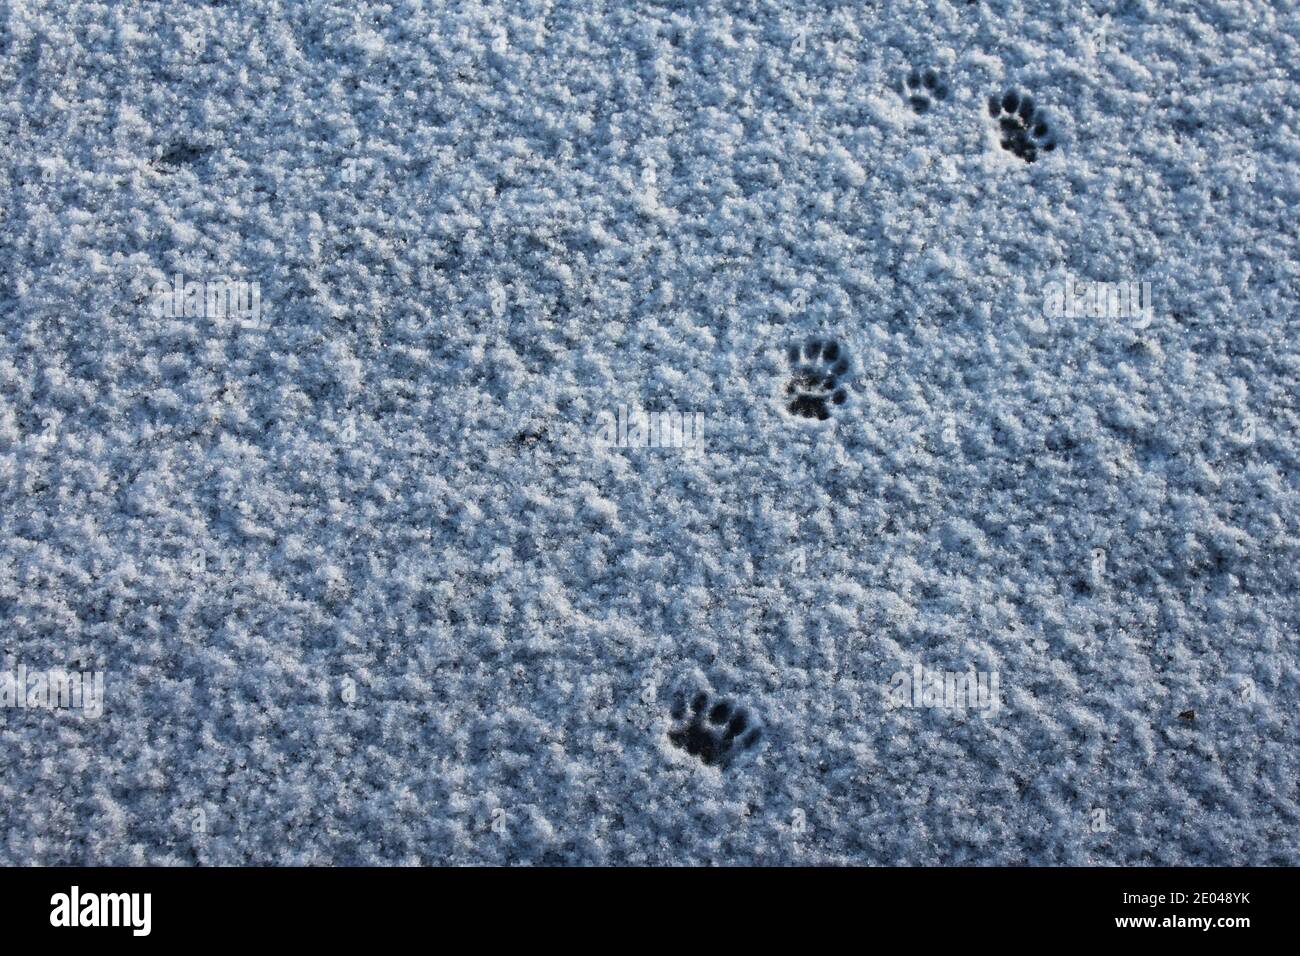 Animals walking in fresh snow. Winter tracks, animal (cat) paw prints in  dusting of snow. Winters in the United Kingdom. Stock Photo